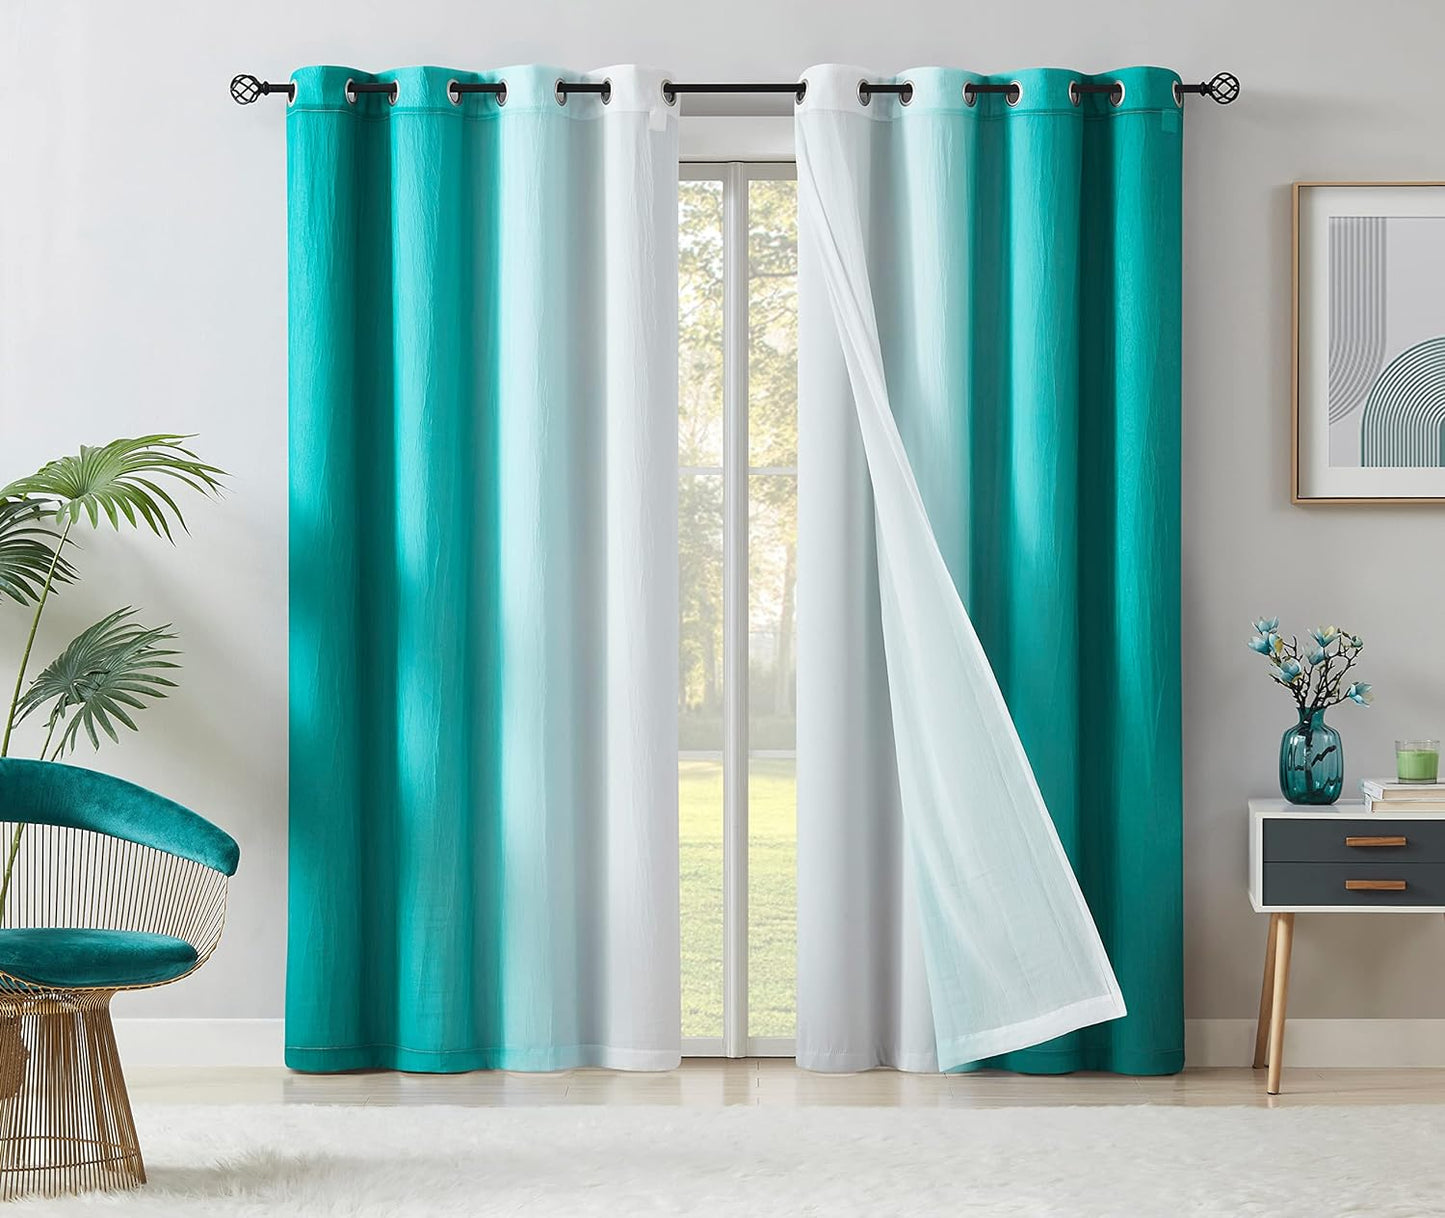 Mix and Match Blackout Curtains - Bedroom Solid Black Full Blackout Window Panels & Black Chiffon Sheer Curtains Thermal Insulated Drapes for Living Room, Grommet, 52" W X 63" L, Set of 4  Purainbow Teal/White 52" X 63" 